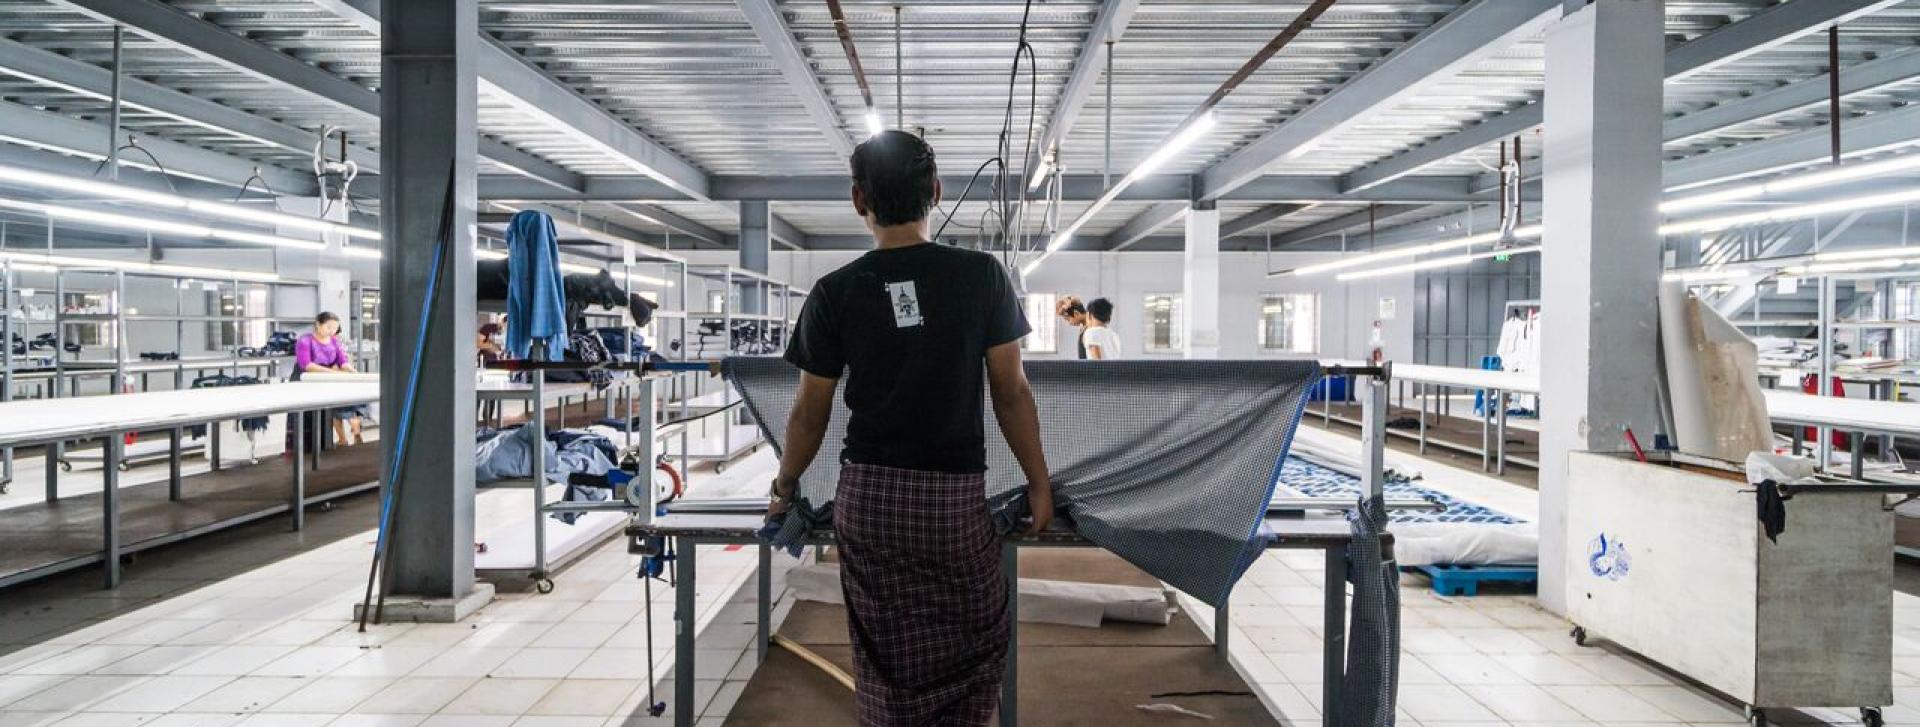 Apparel export volumes from Myanmar increased by 750 percent over the previous decade, reaching 9.3 billion USD in 2022